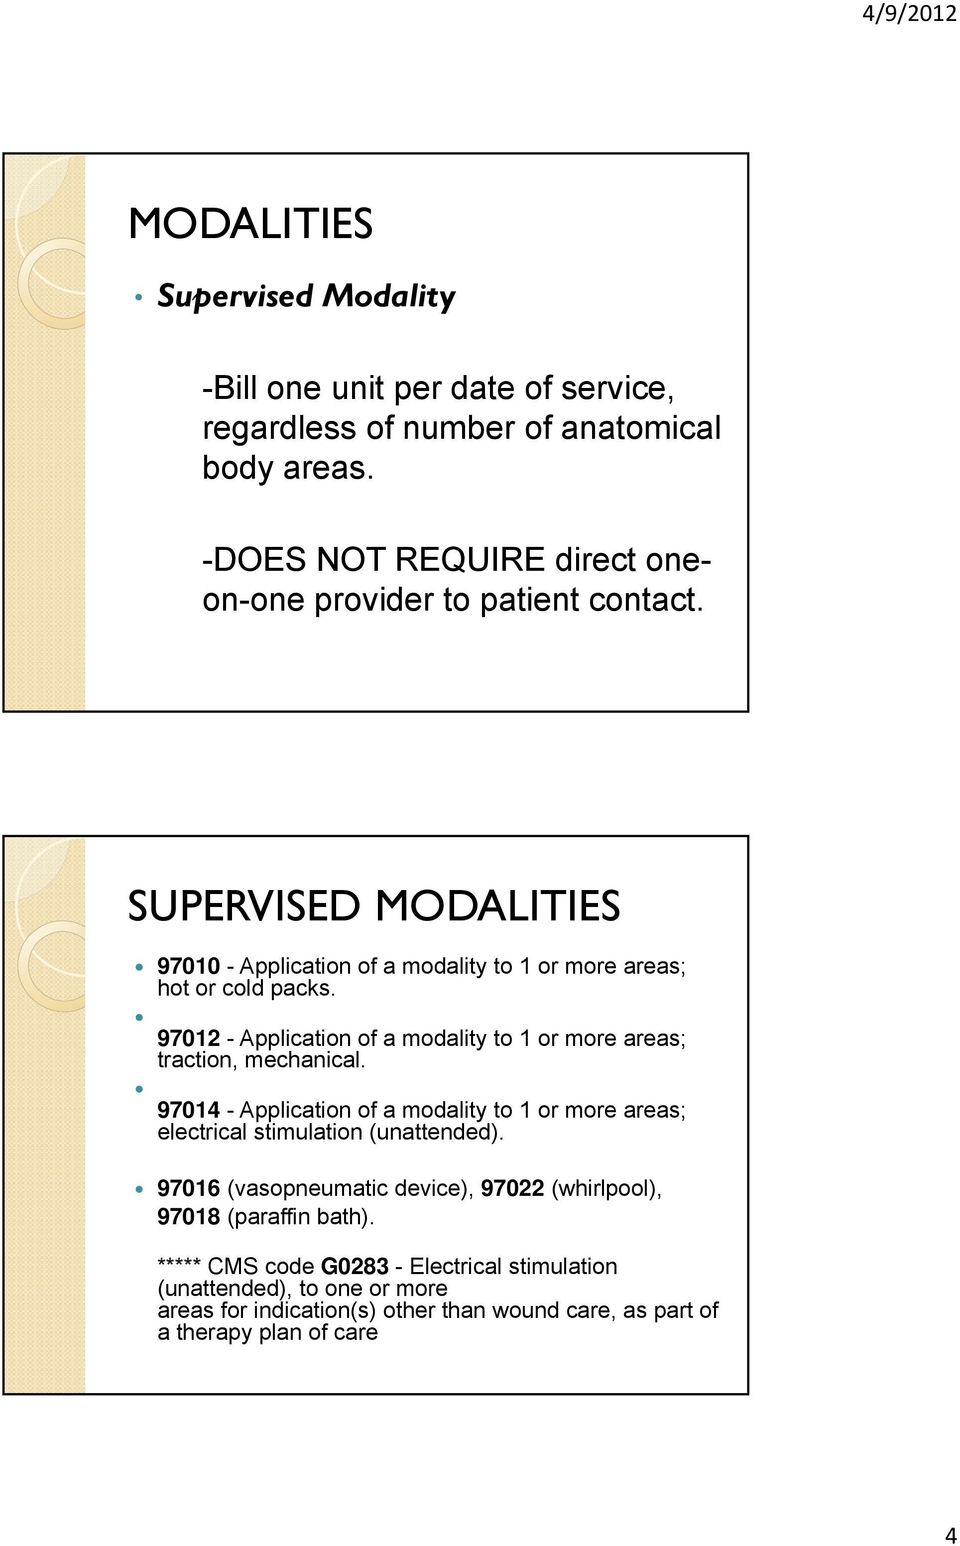 97012 - Application of a modality to 1 or more areas; traction, mechanical. 97014 - Application of a modality to 1 or more areas; electrical stimulation (unattended).